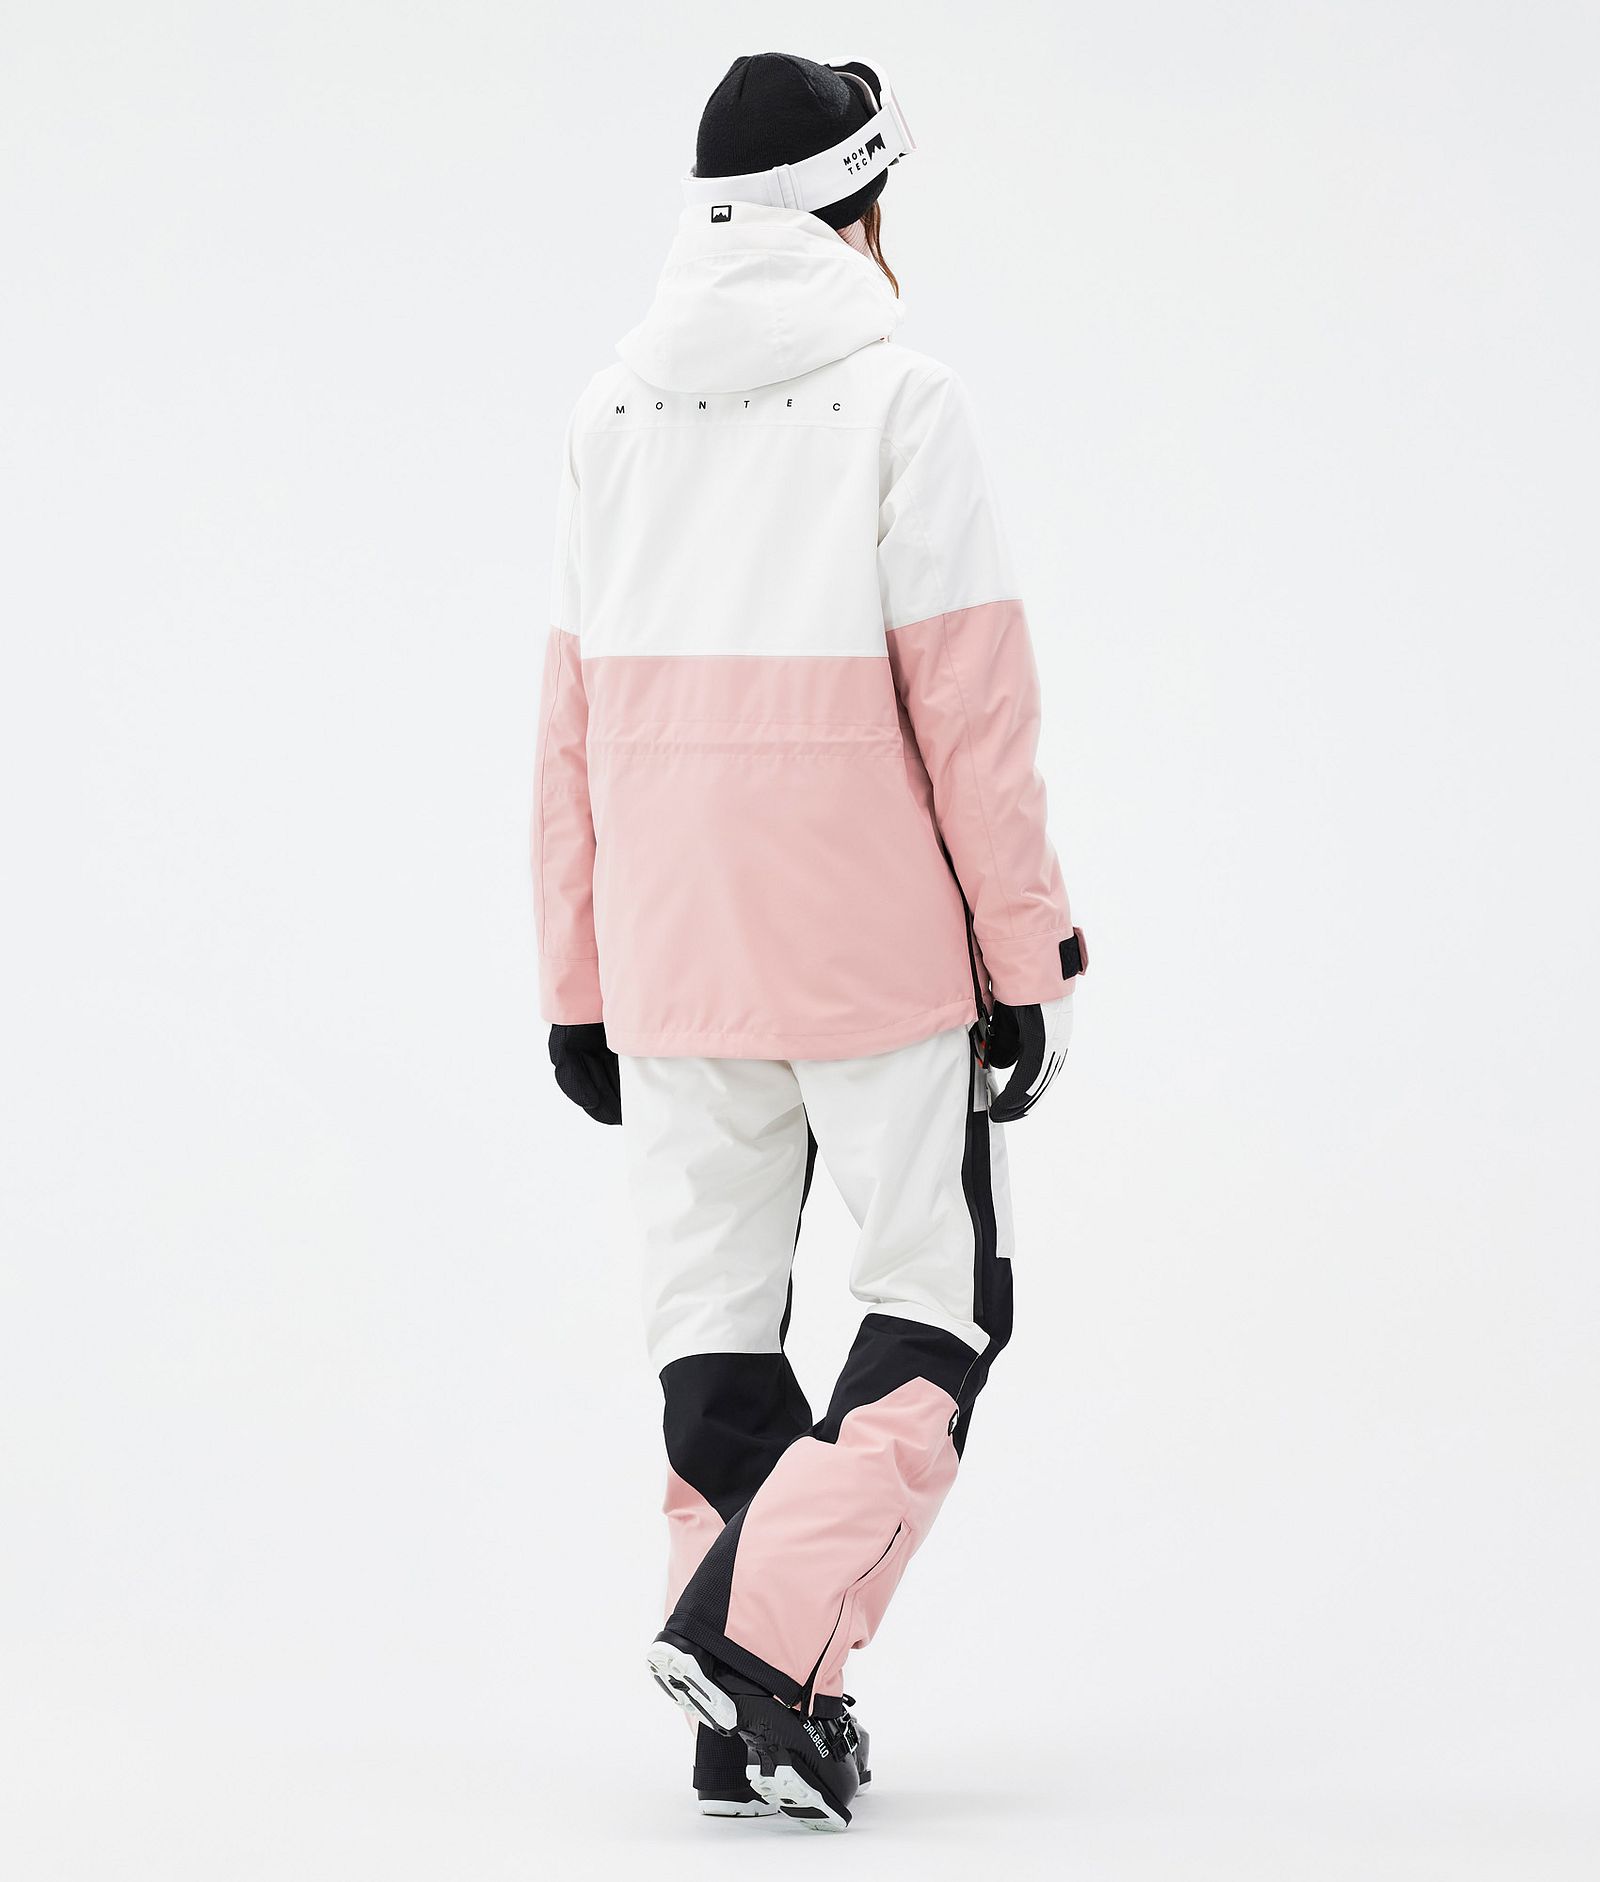 Montec Dune W Skidoutfit Dame Old White/Black/Soft Pink